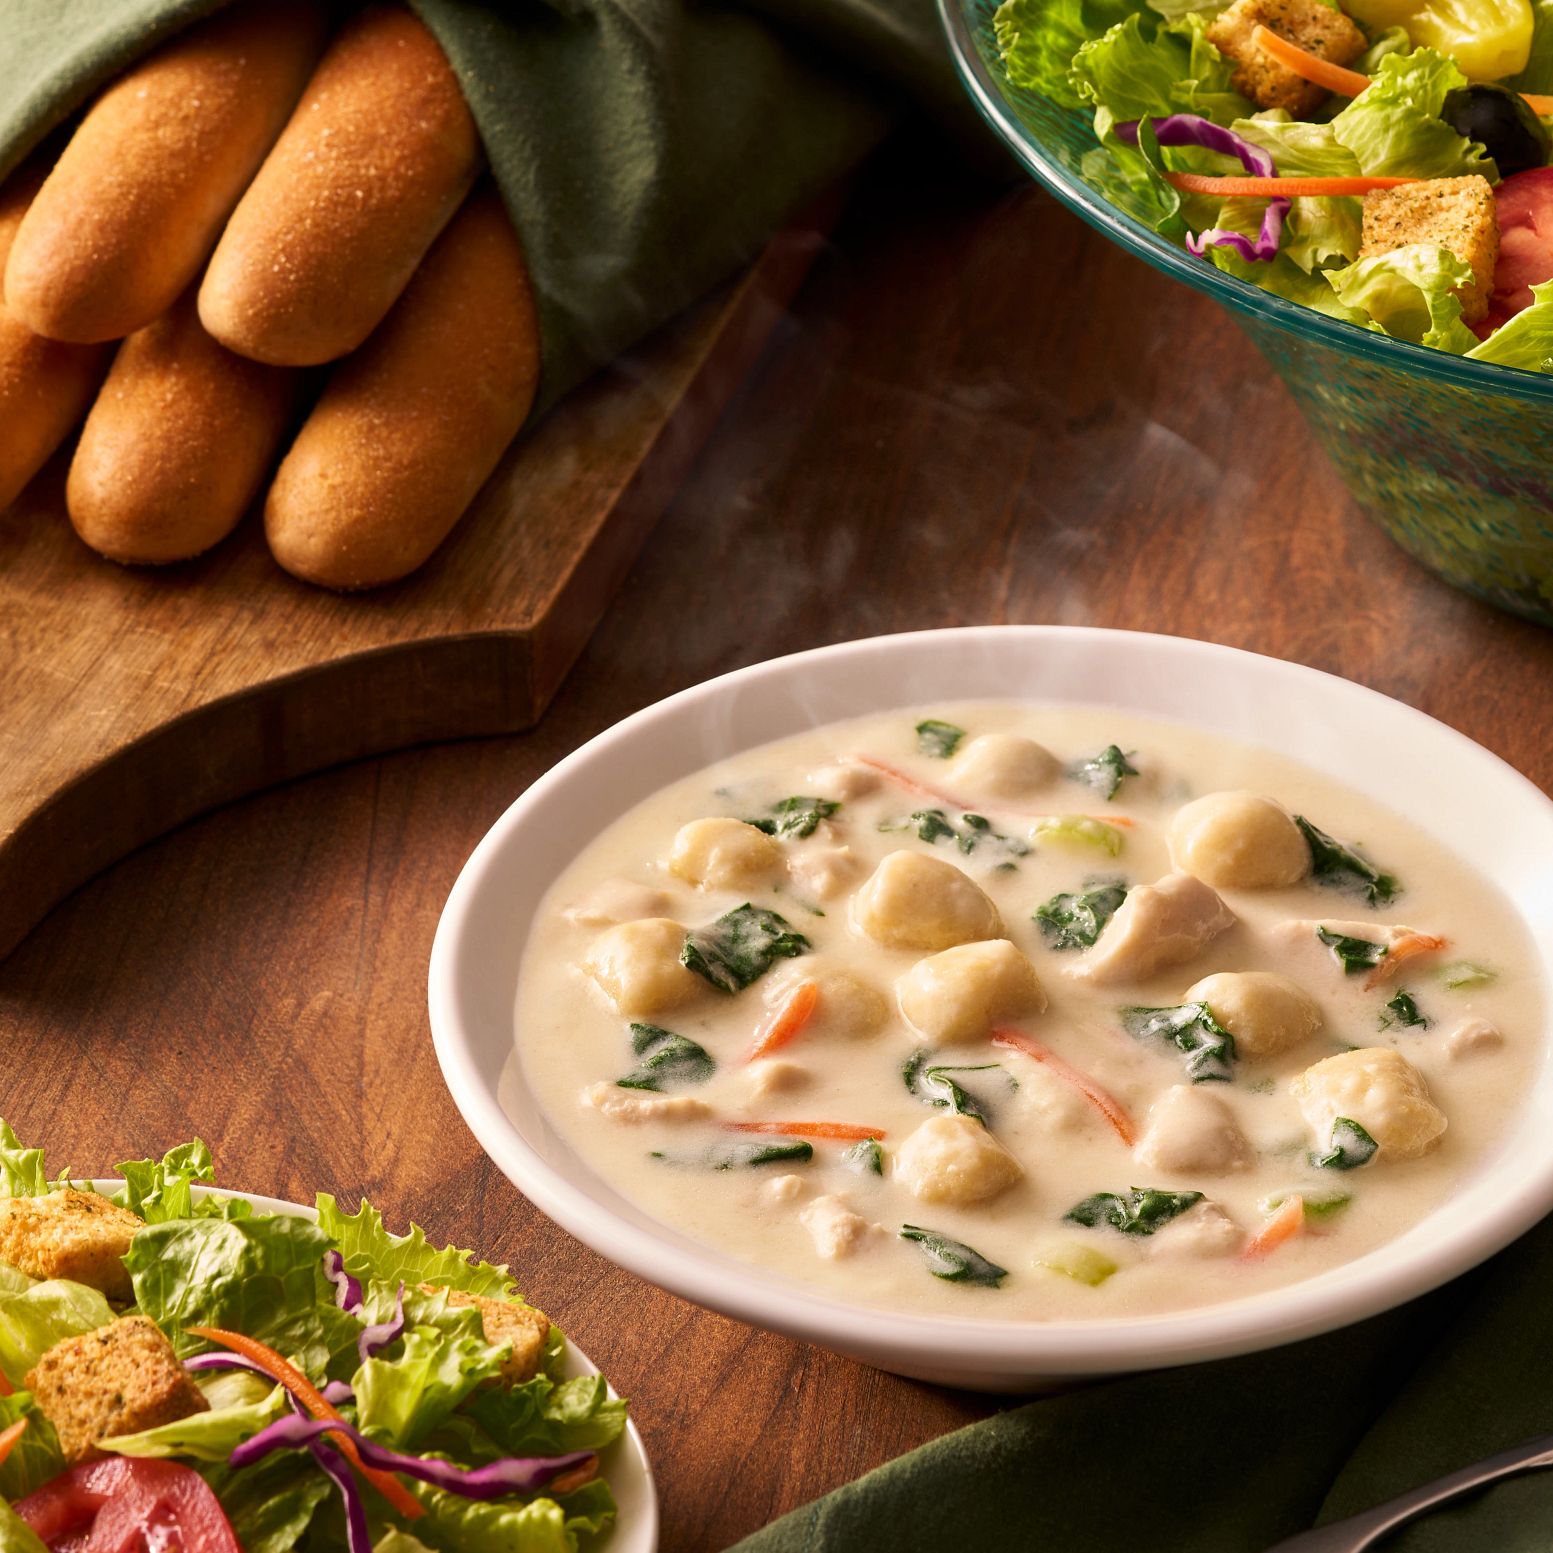 Chicken & Gnocchi: A creamy soup made with roasted chicken, Italian dumplings and spinach. Olive Garden Italian Restaurant Savannah (912)961-9009